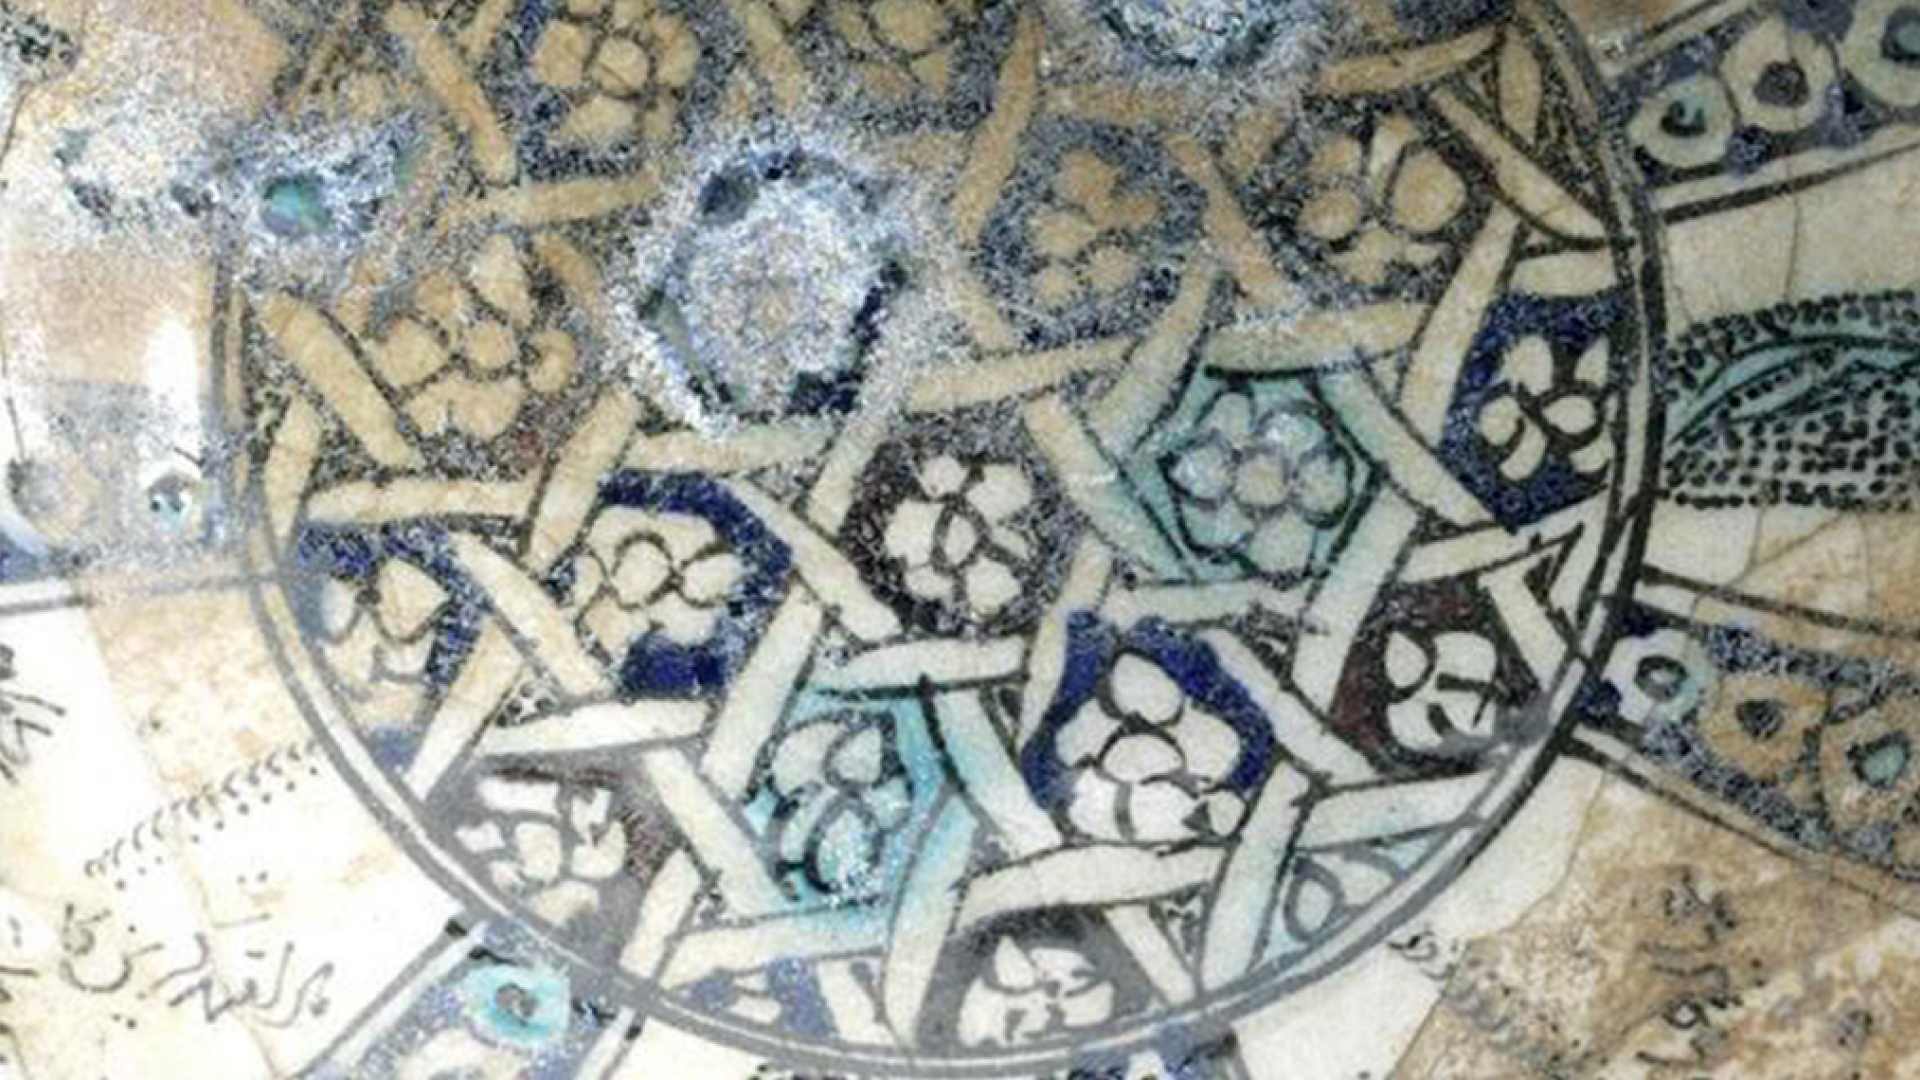 Detail of bowl with geometric interlace pattern.